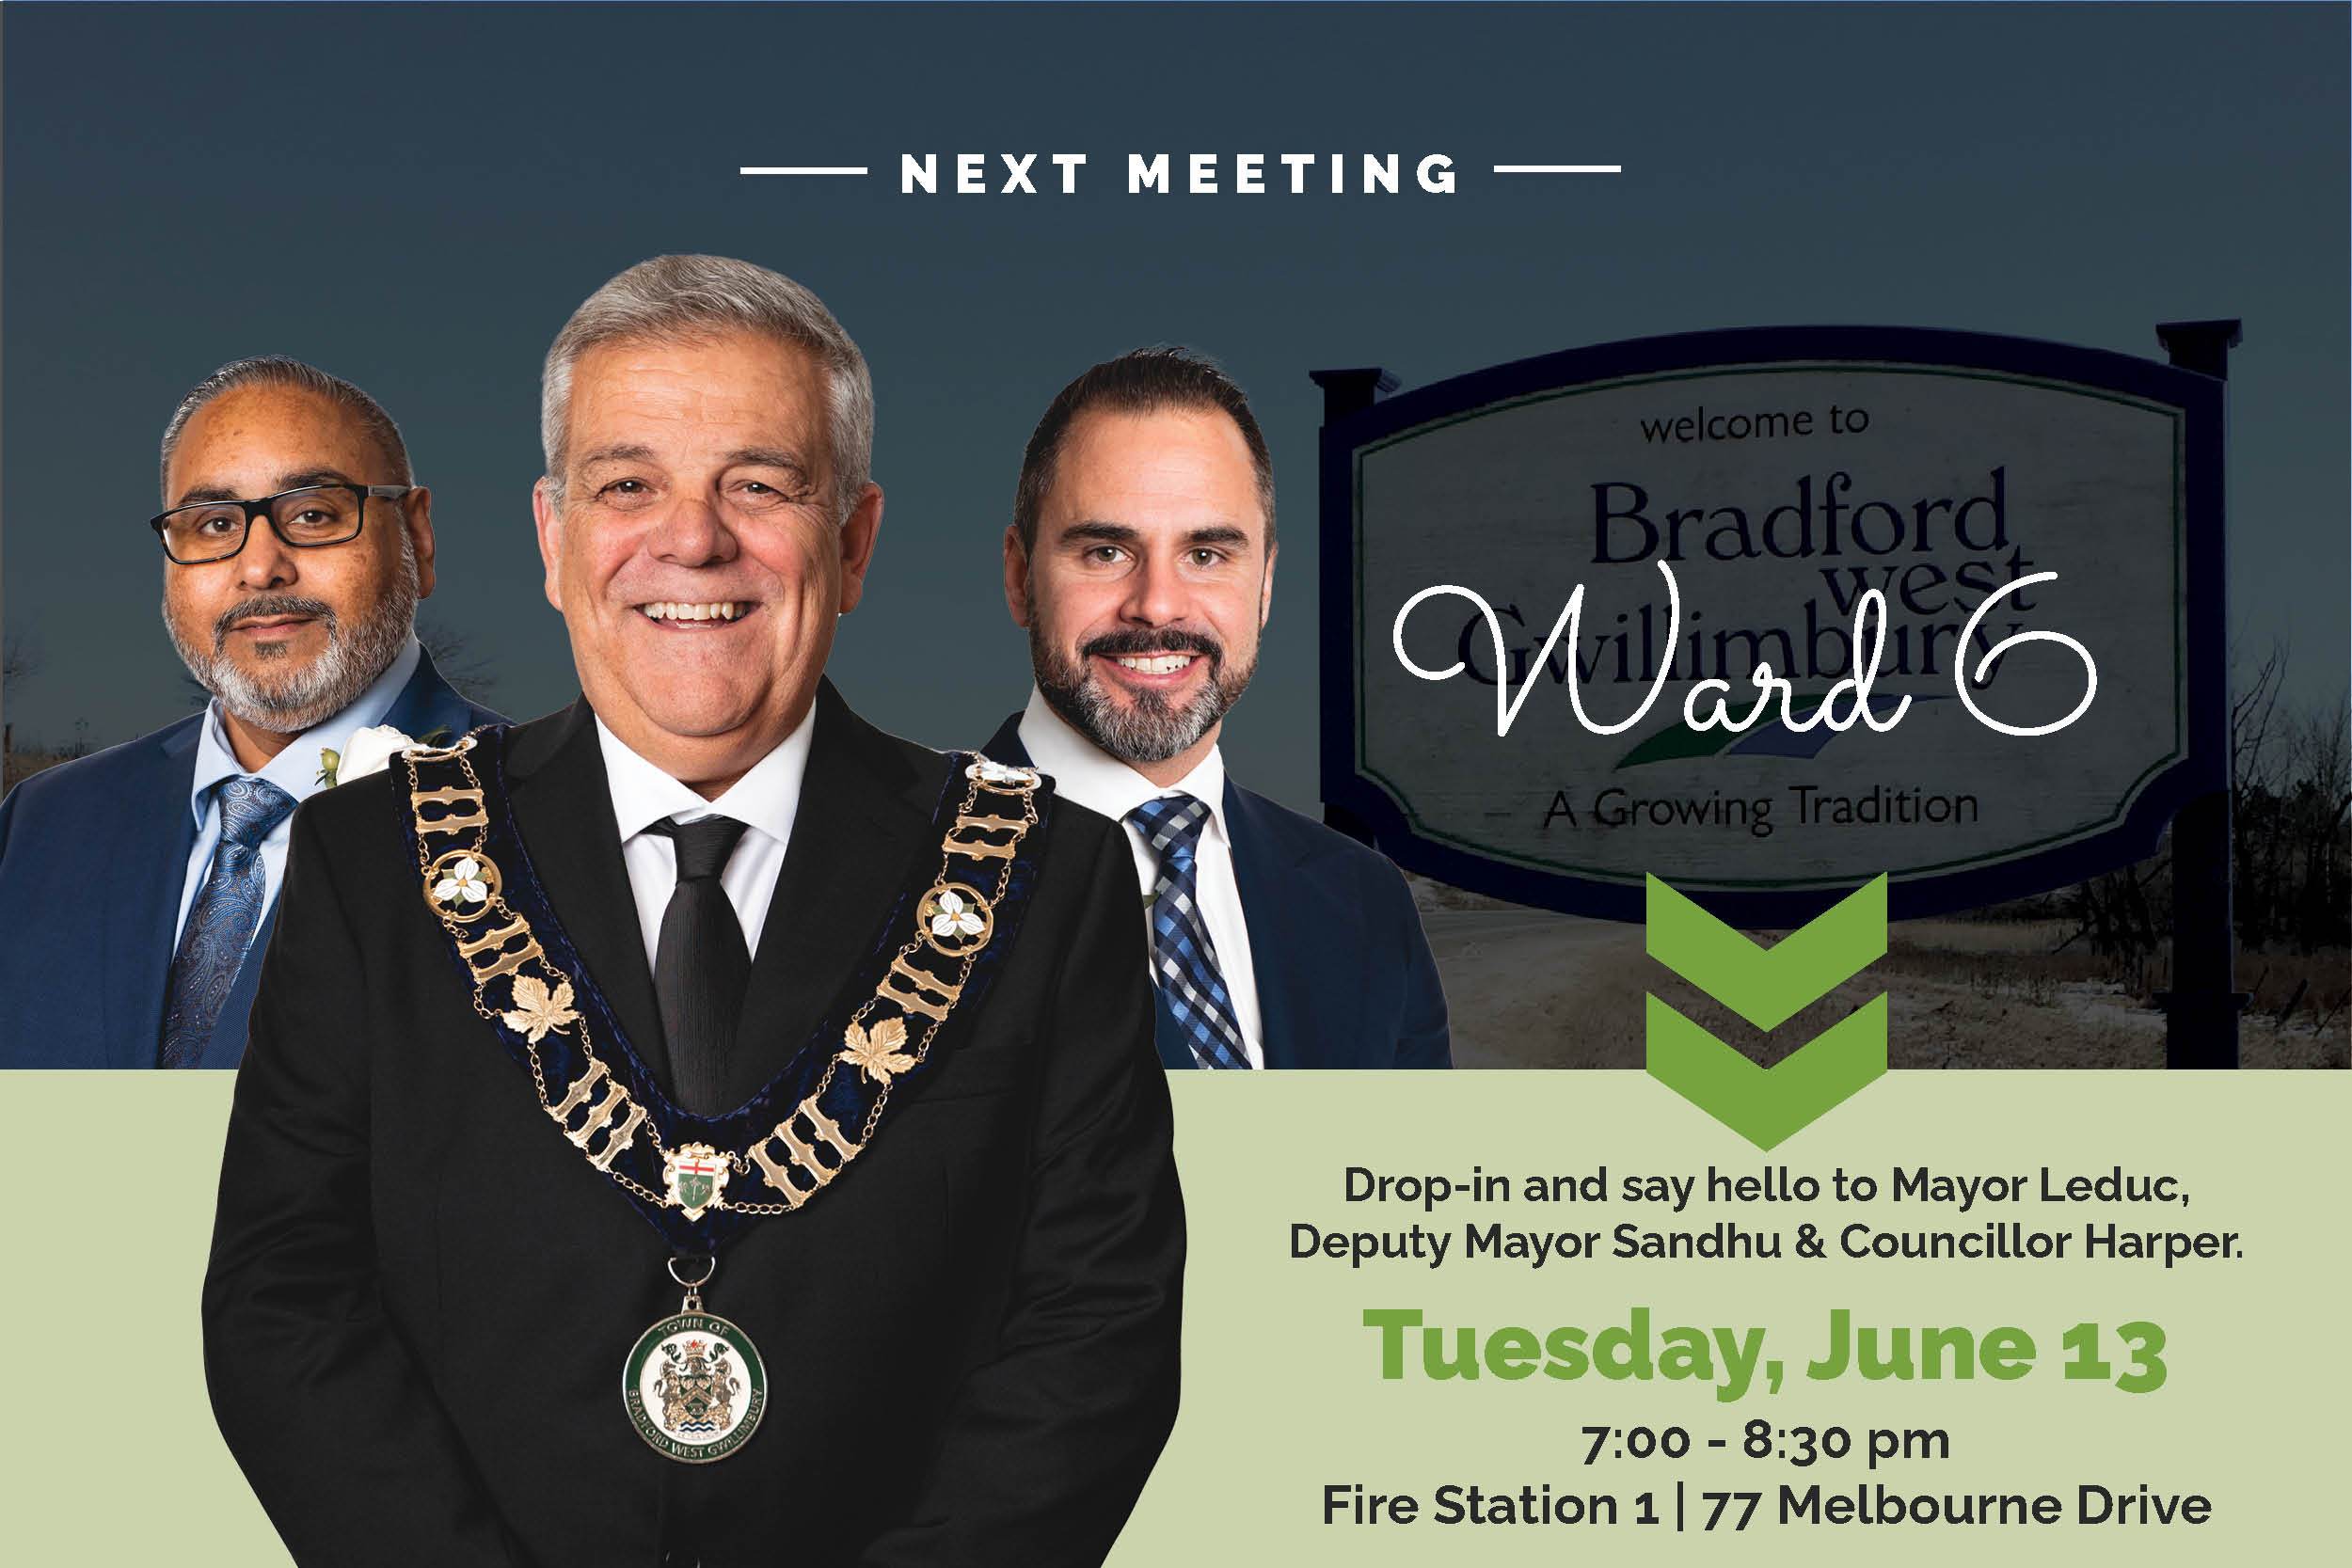 CAN promo graphic featuring photo of Mayor Leduc, Deputy Mayor Sandhu and Councillor Harper